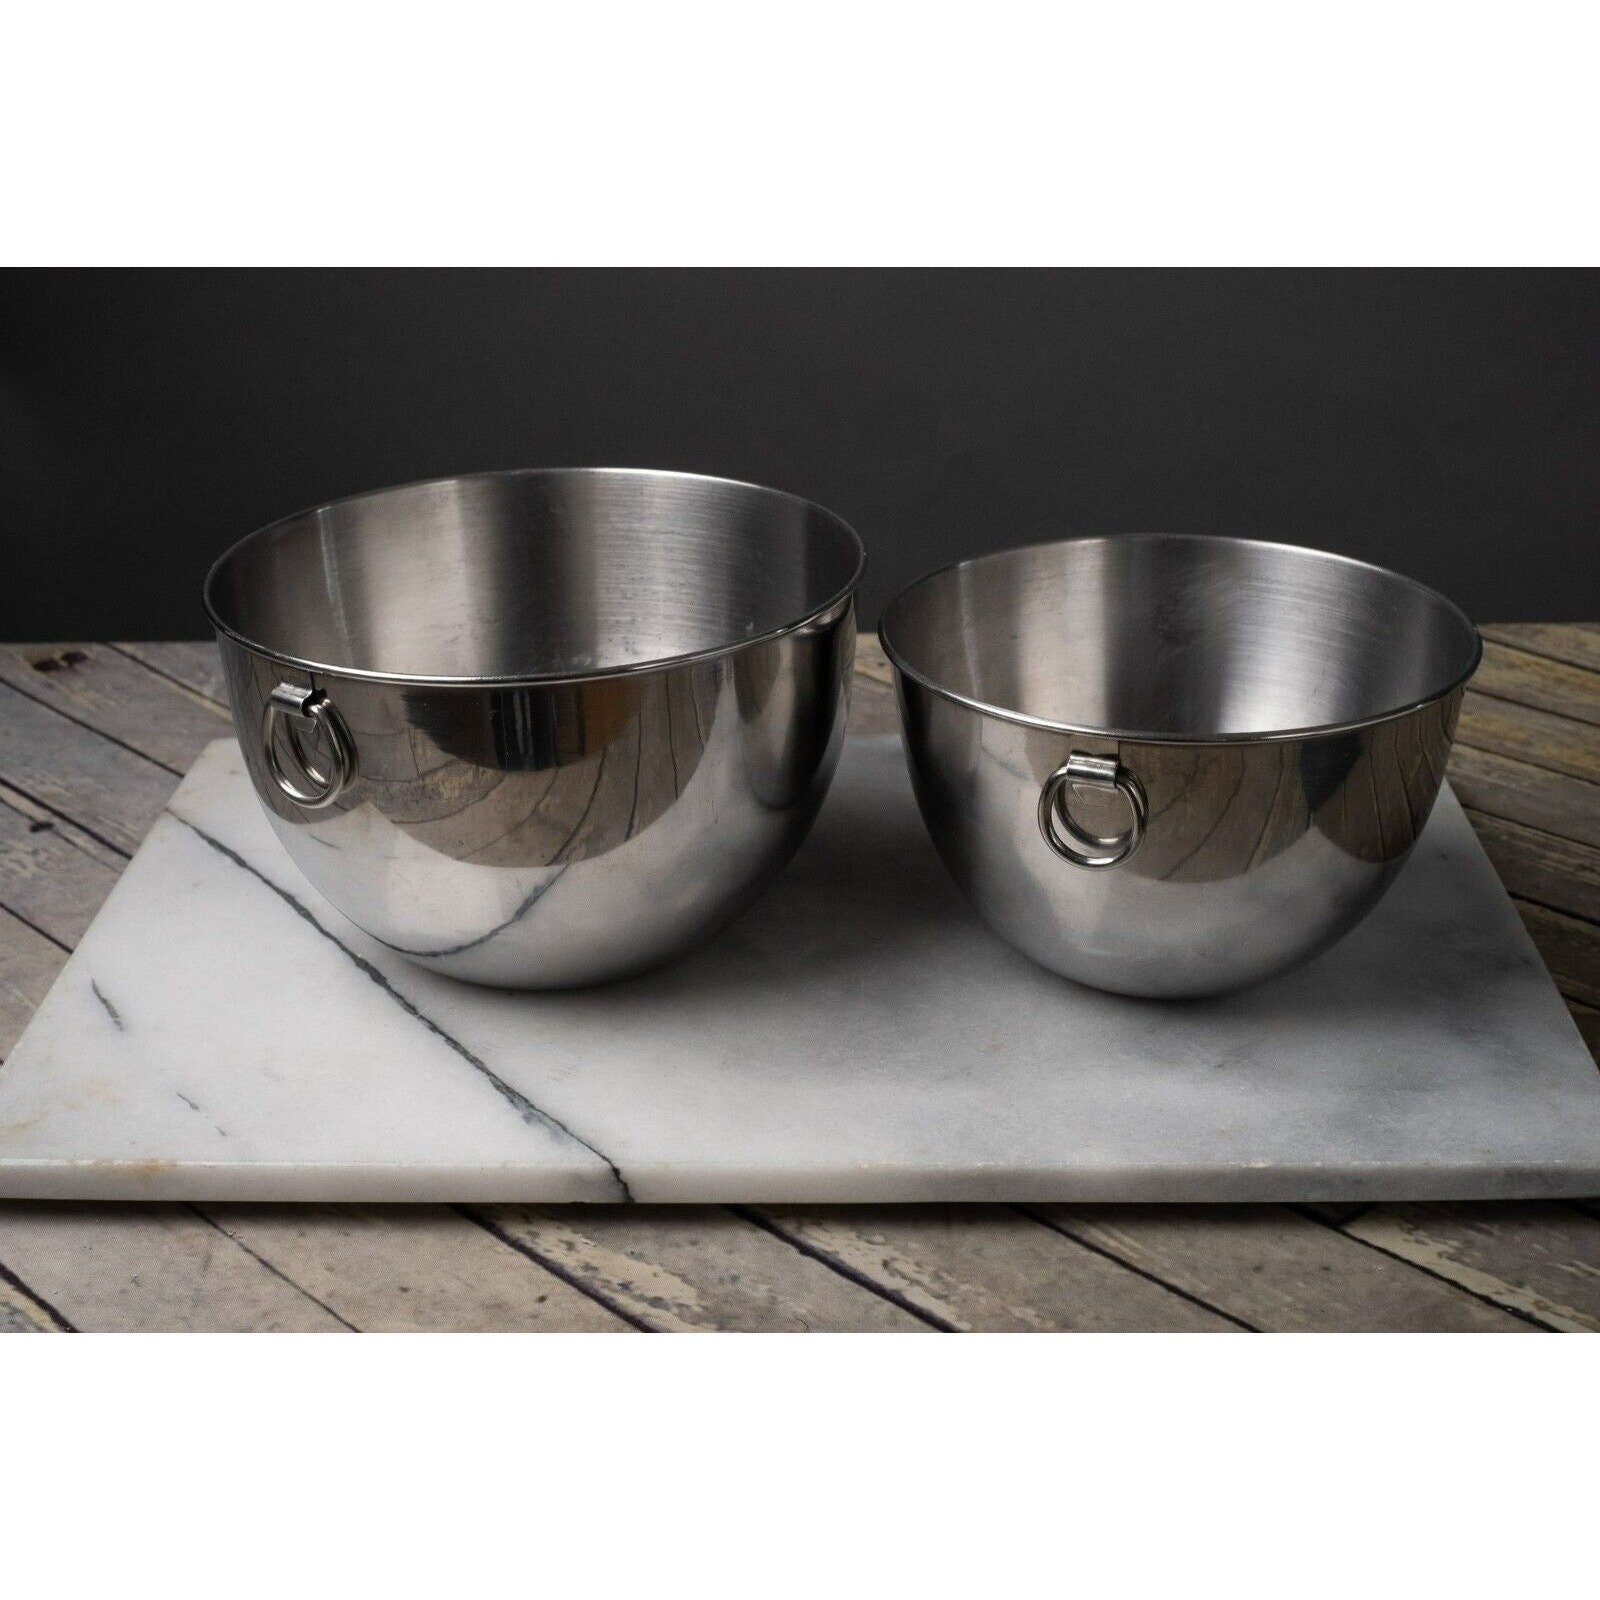 Stainless Steel Mixing Bowls Set of 3 – Sourdough Bread Recipe